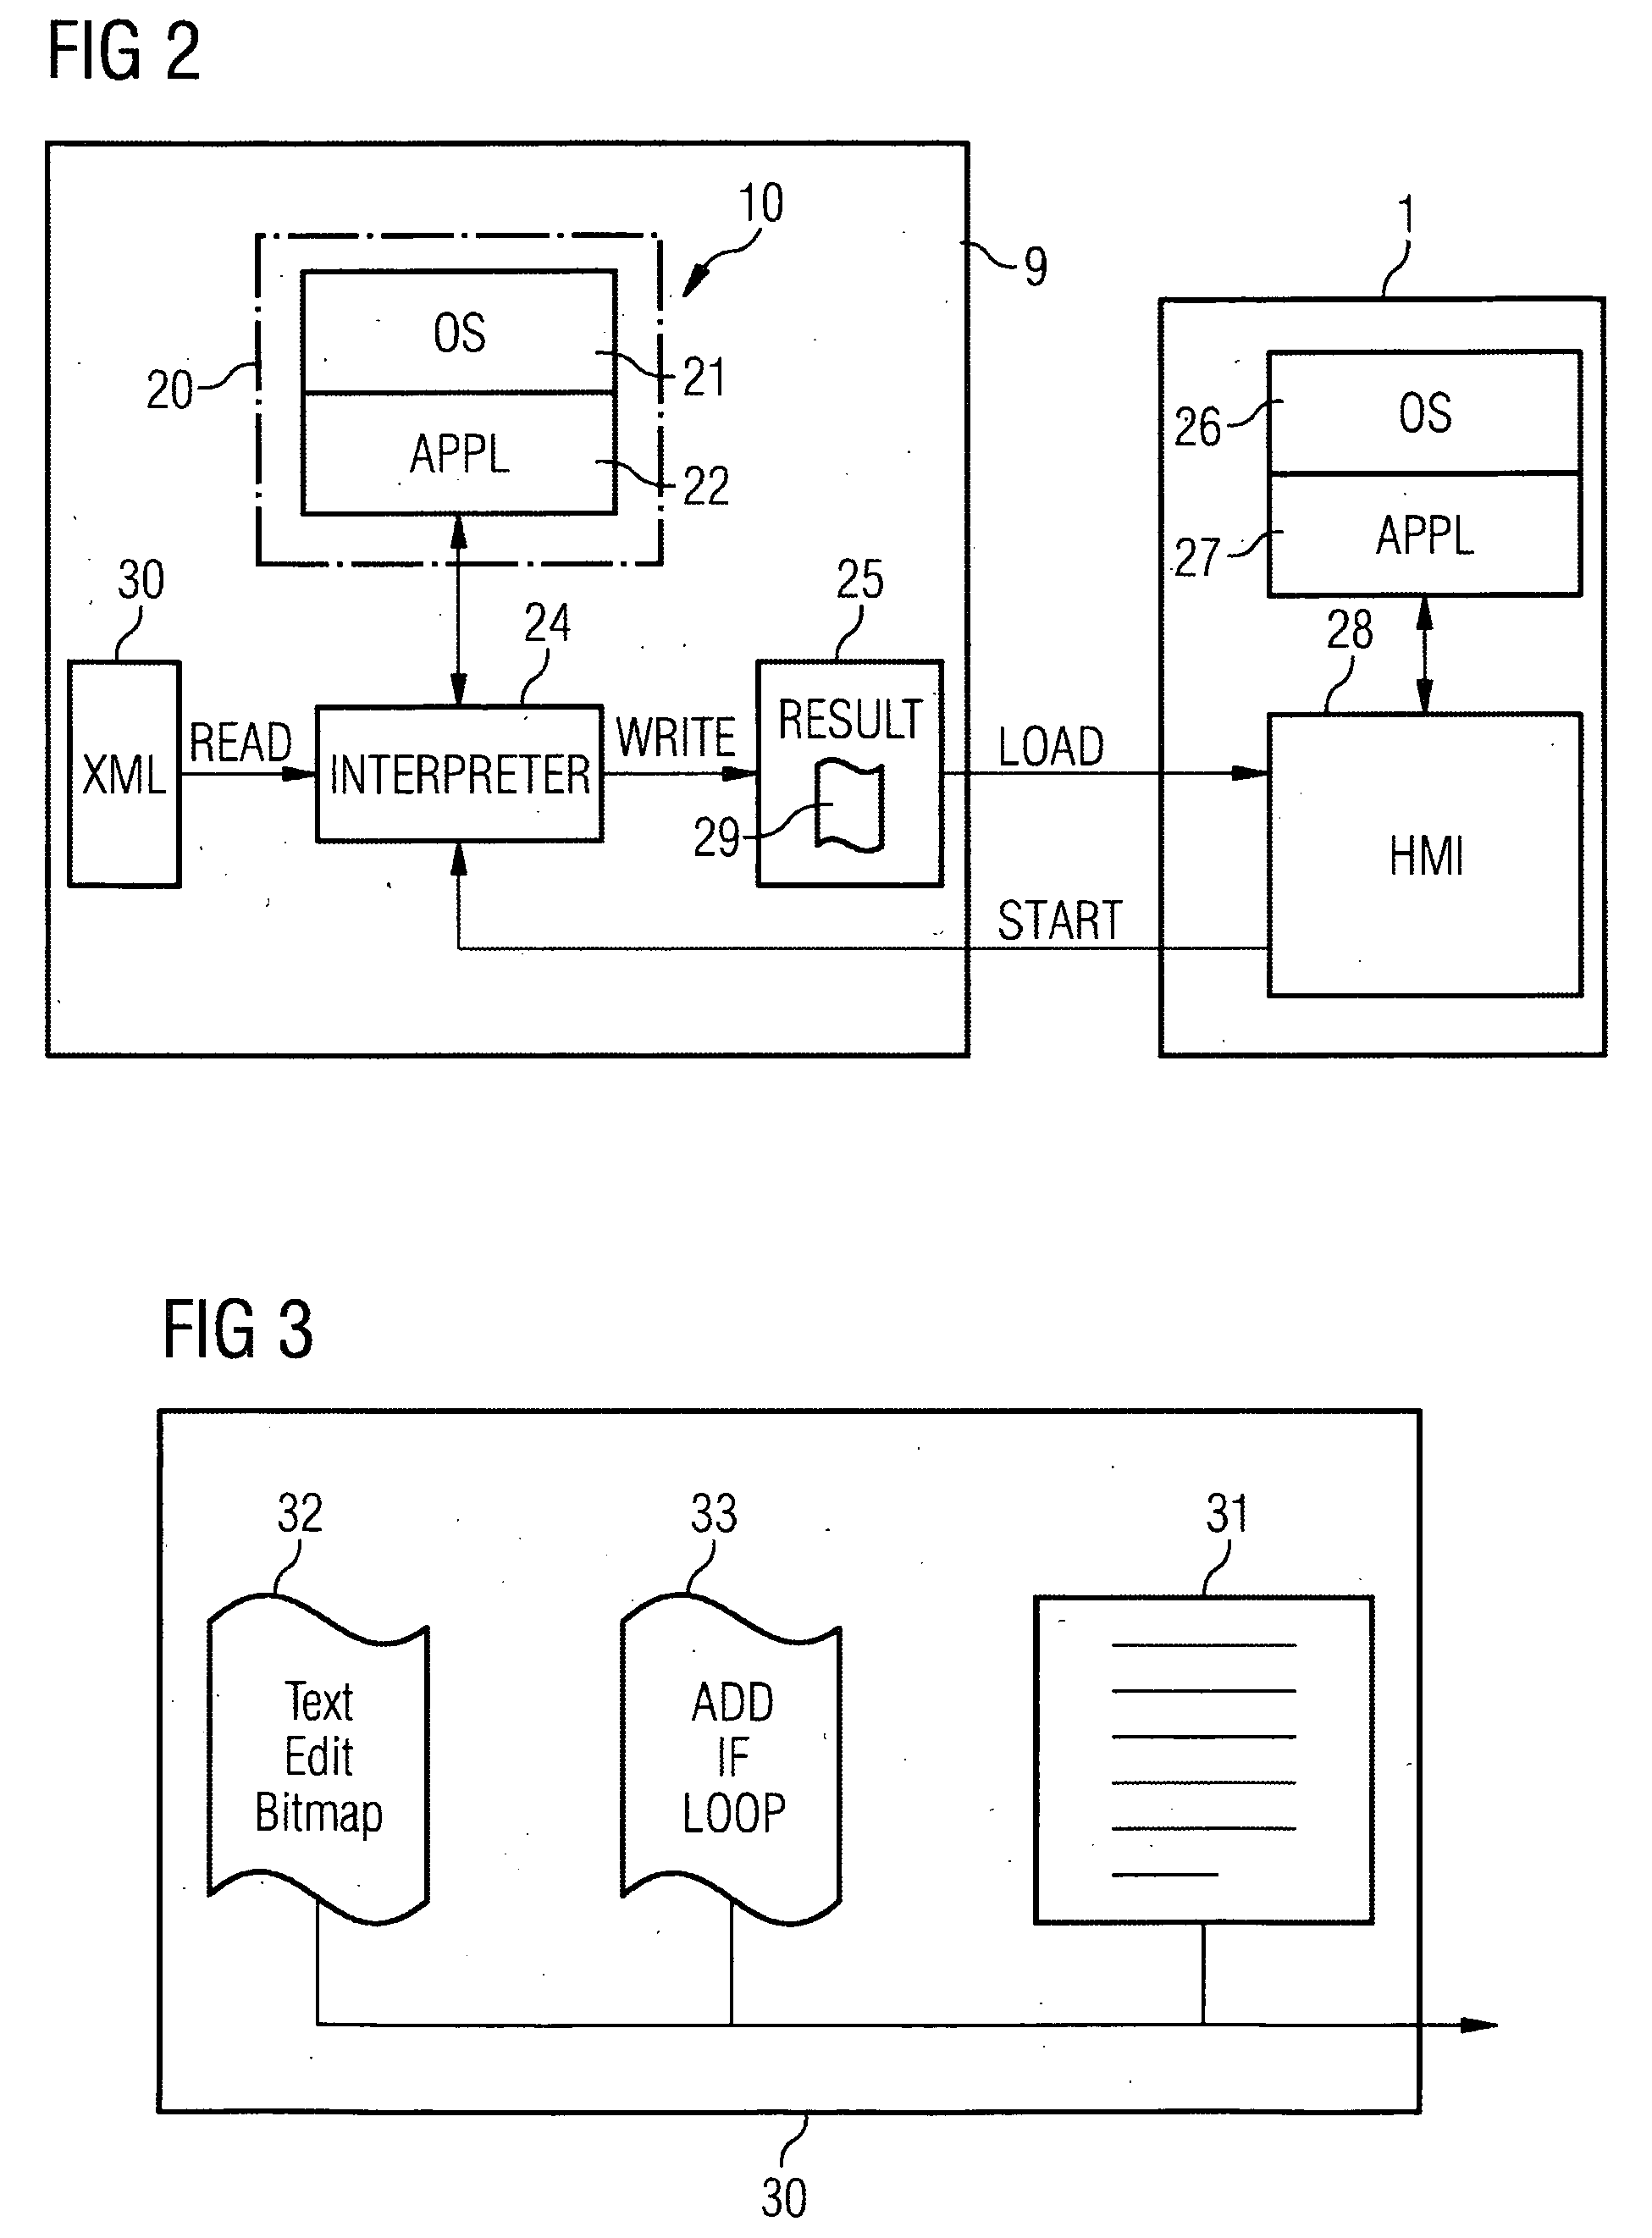 Method for operating and monitoring a control device, corresponding operating/monitoring device, control device and machine with such a control device, and uses of the method together with data storage media